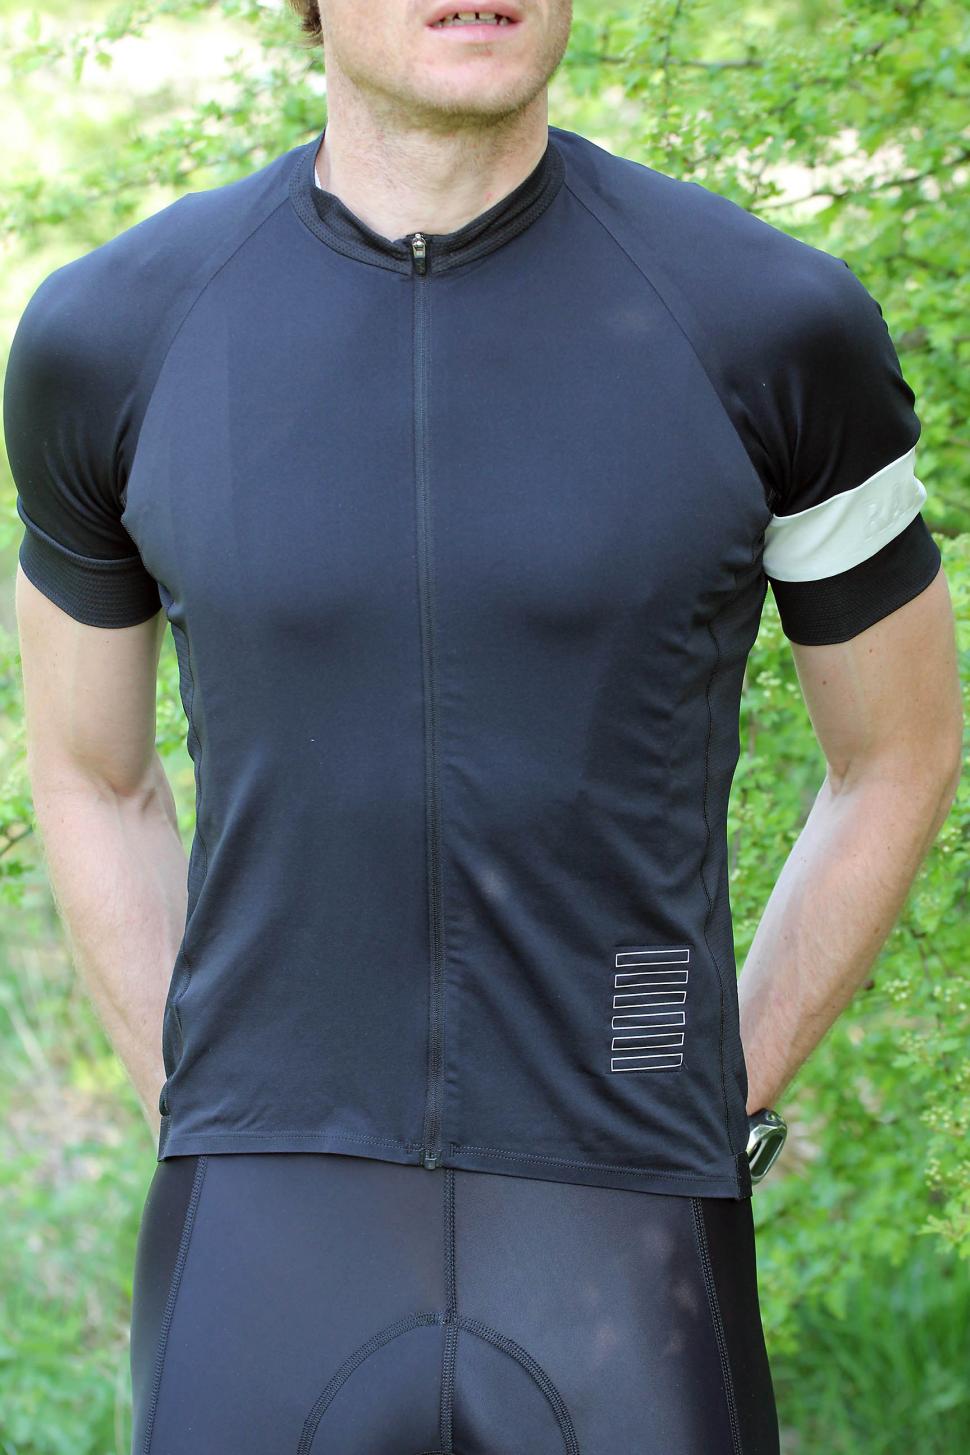 rapha jersey review